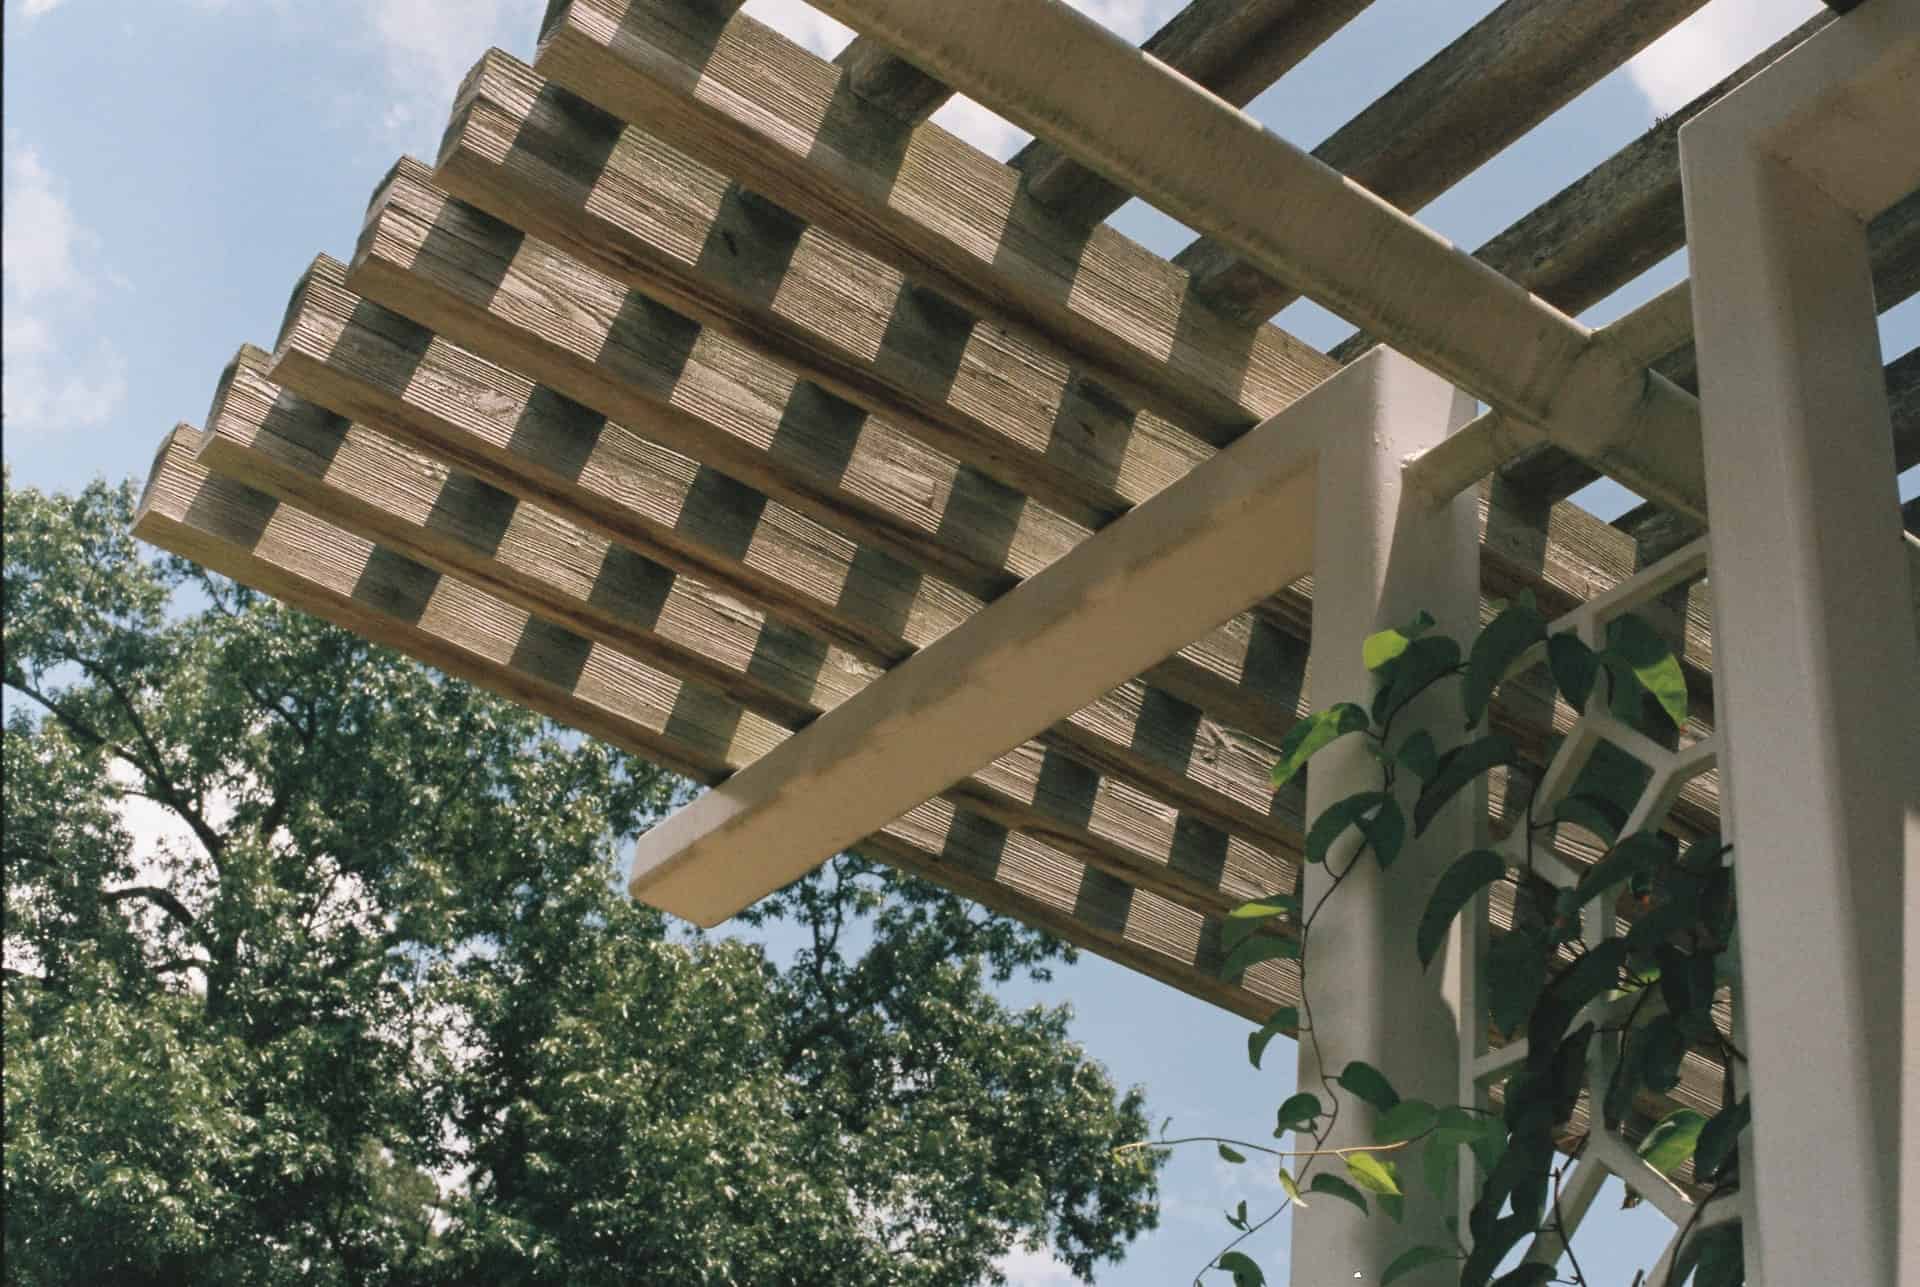 How to Cover a Pergola in 9 easy steps #pergola #Cover #instructions #howto #how #backyardLandscaping #backyardLandscapingIdeas #backyard #outdoor